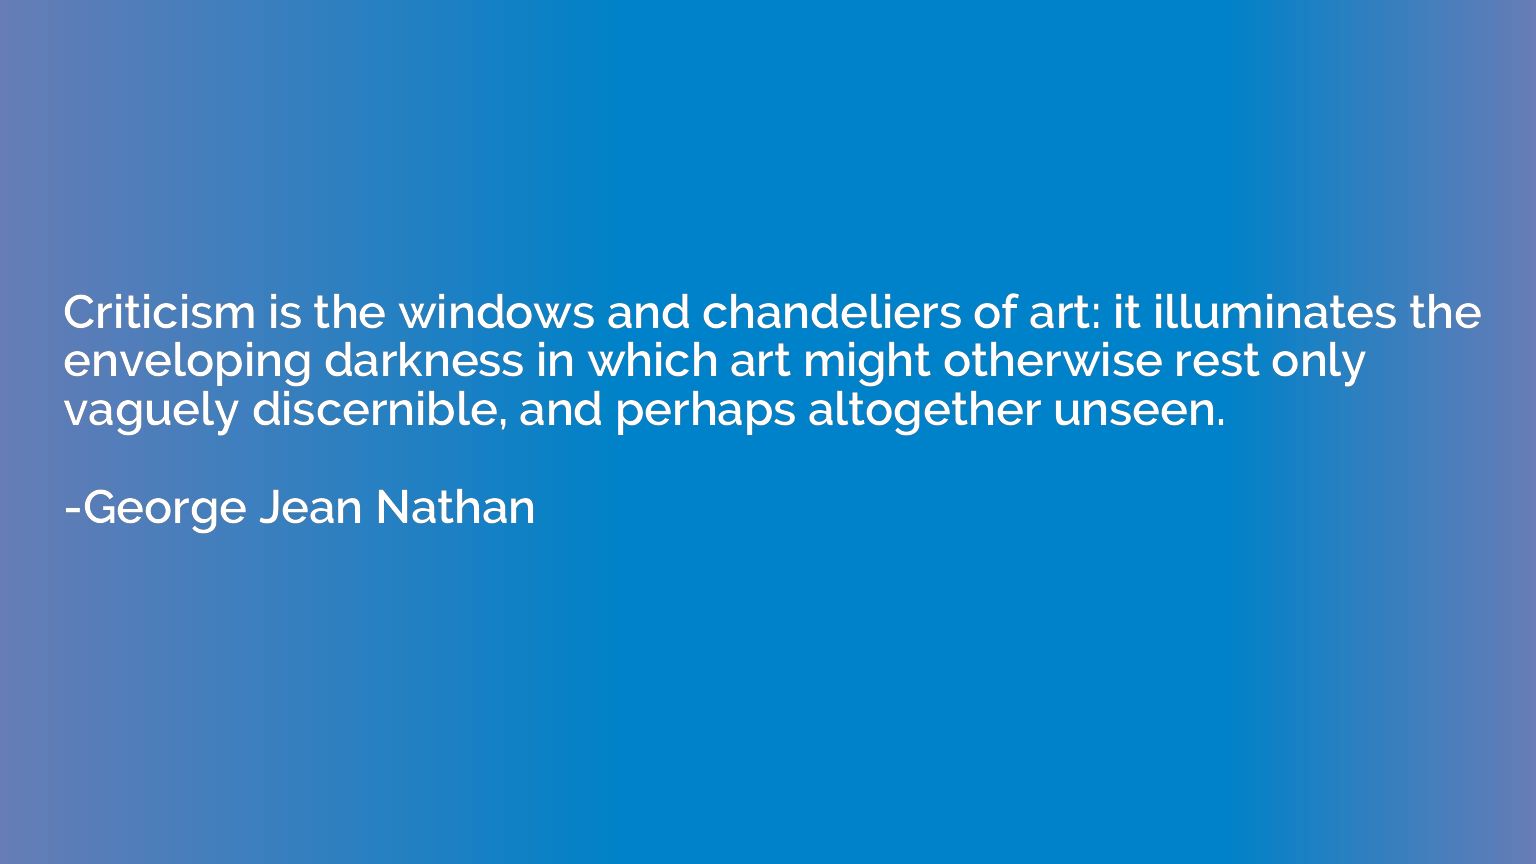 Criticism is the windows and chandeliers of art: it illumina